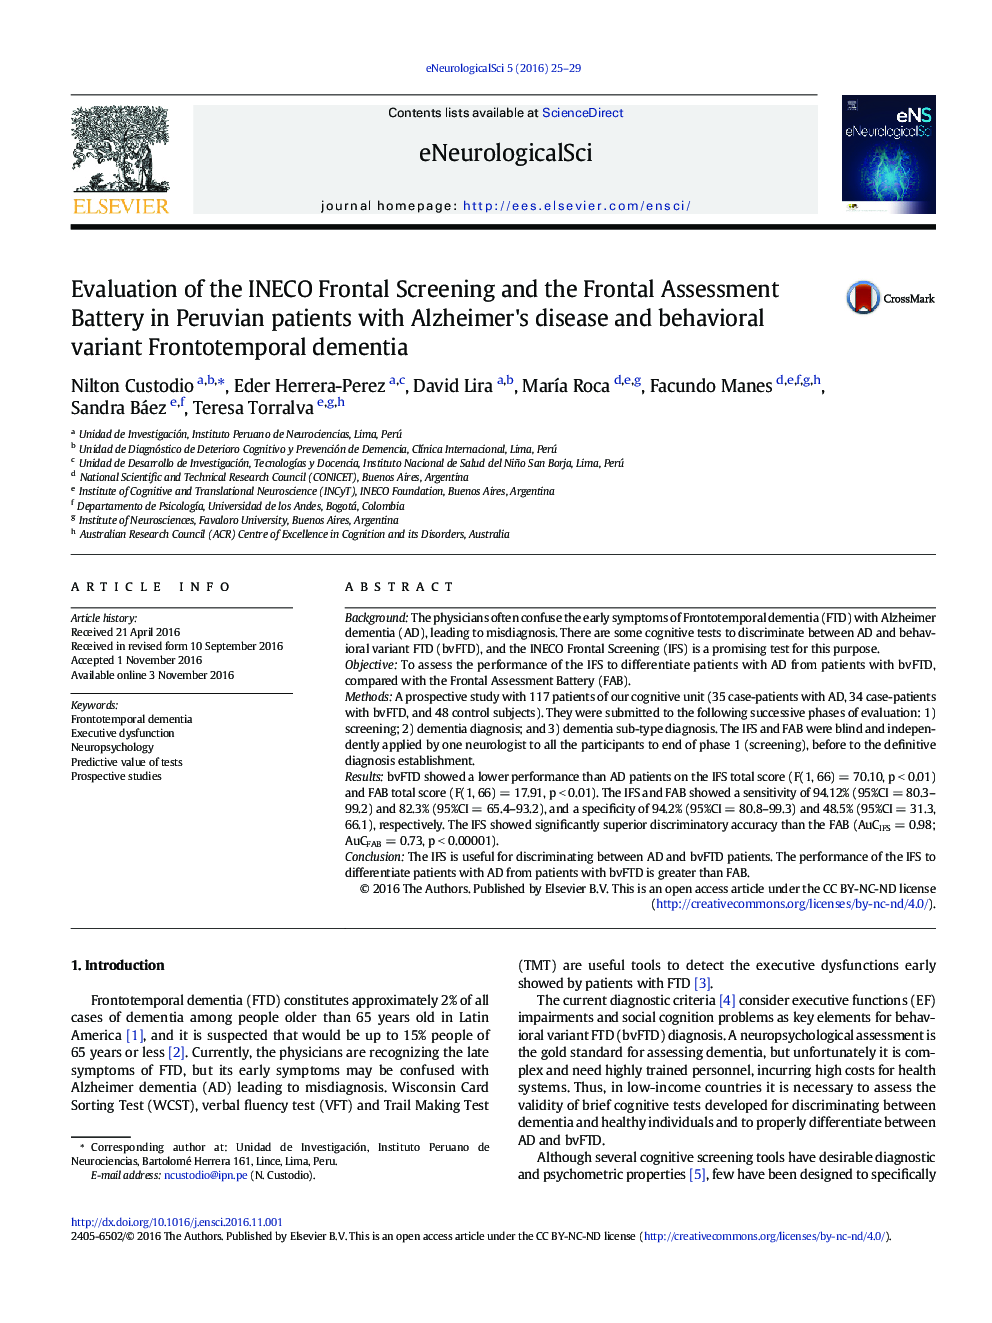 Evaluation of the INECO Frontal Screening and the Frontal Assessment Battery in Peruvian patients with Alzheimer's disease and behavioral variant Frontotemporal dementia